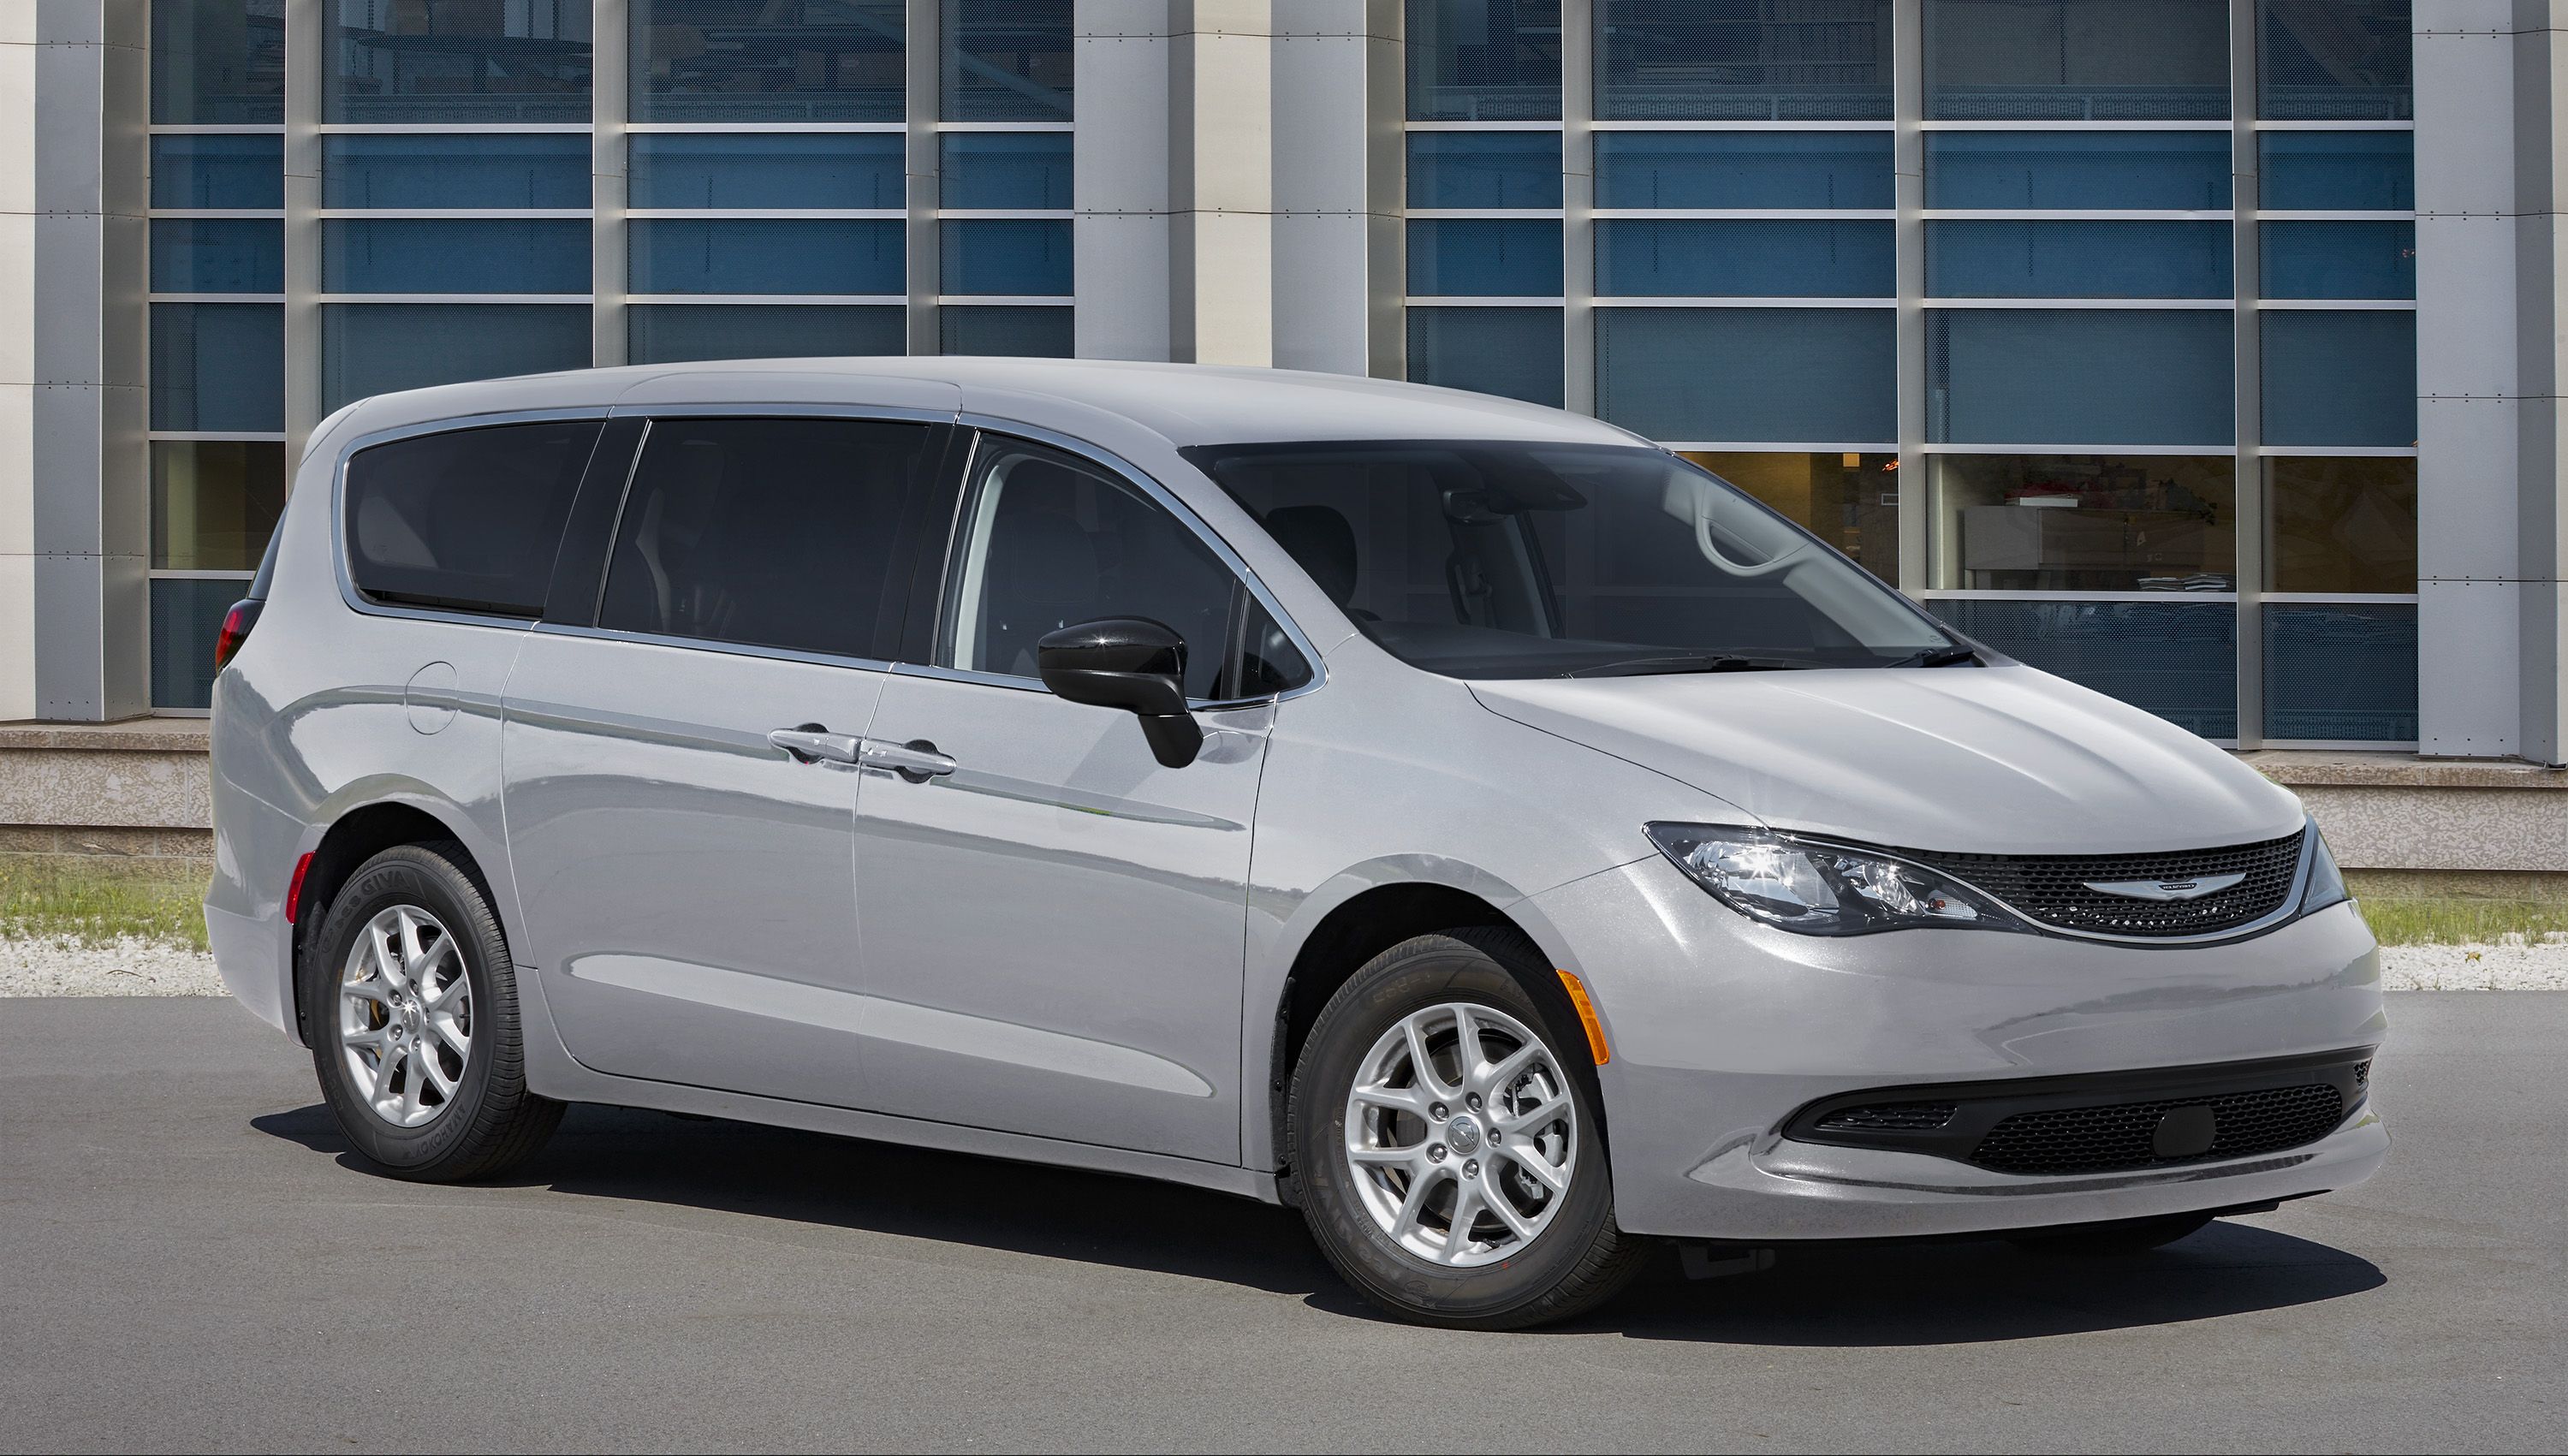 The 2022 Chrysler Voyager, America's Most Affordable Minivan, will be coming soon to Savage L&B in Robesonia, PA!